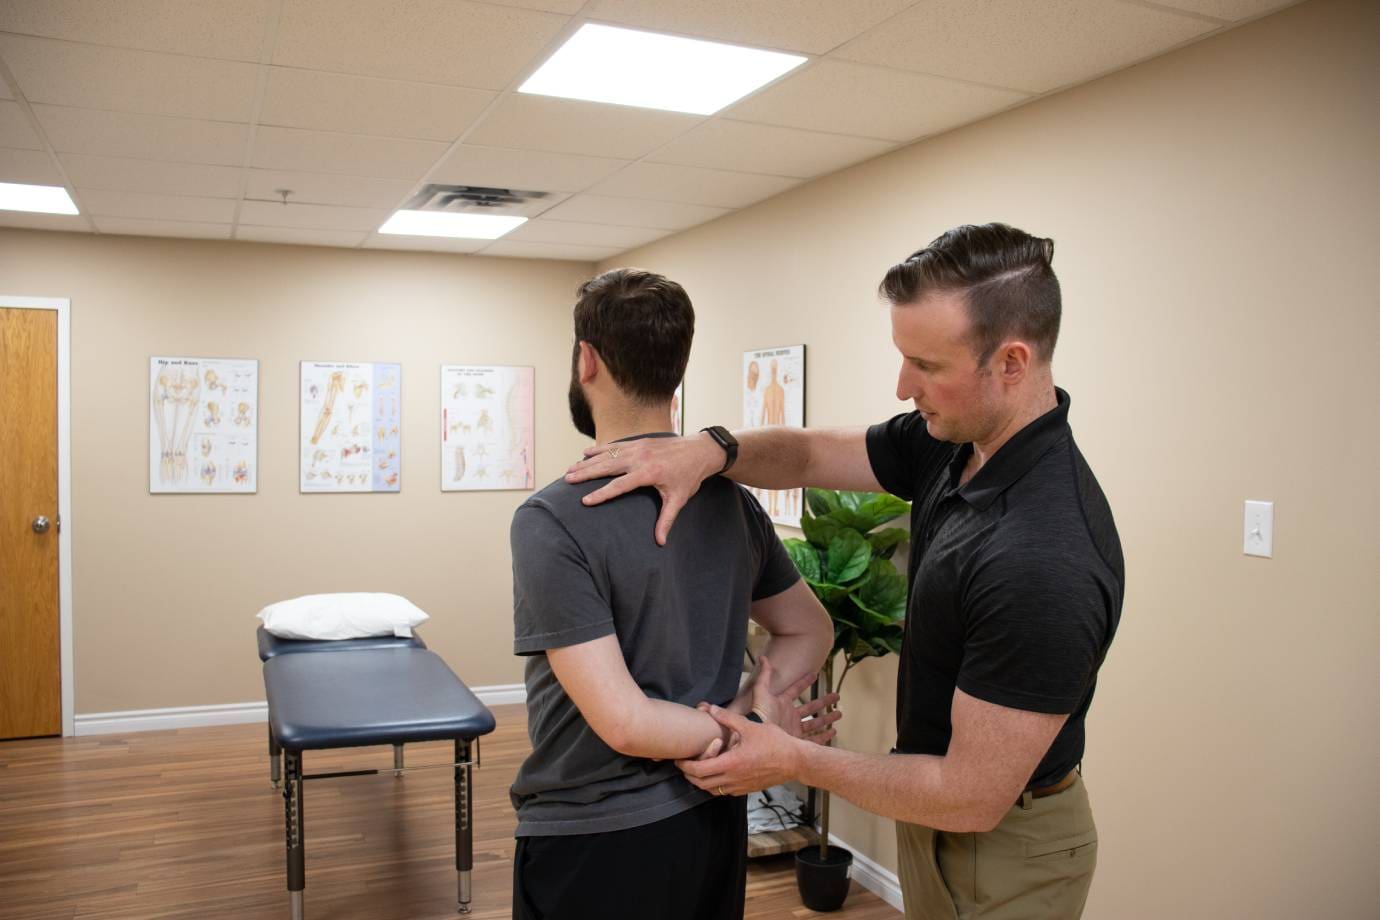 a man is getting his back adjusted in a room